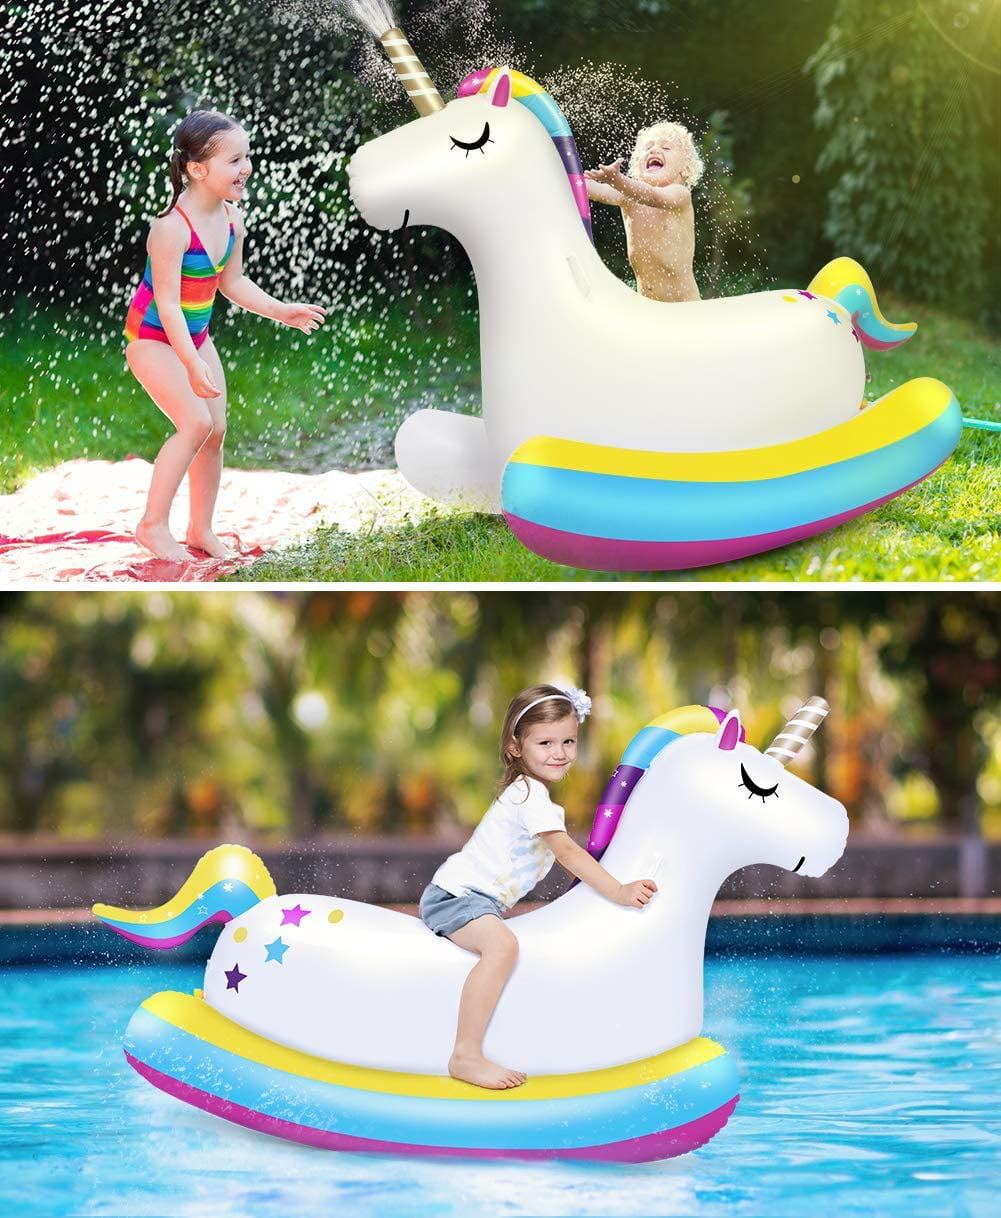 Details about    Unicorn Sprinkler for Kids Giant Inflatable Unicorn Pool Float Ride On X-Large 